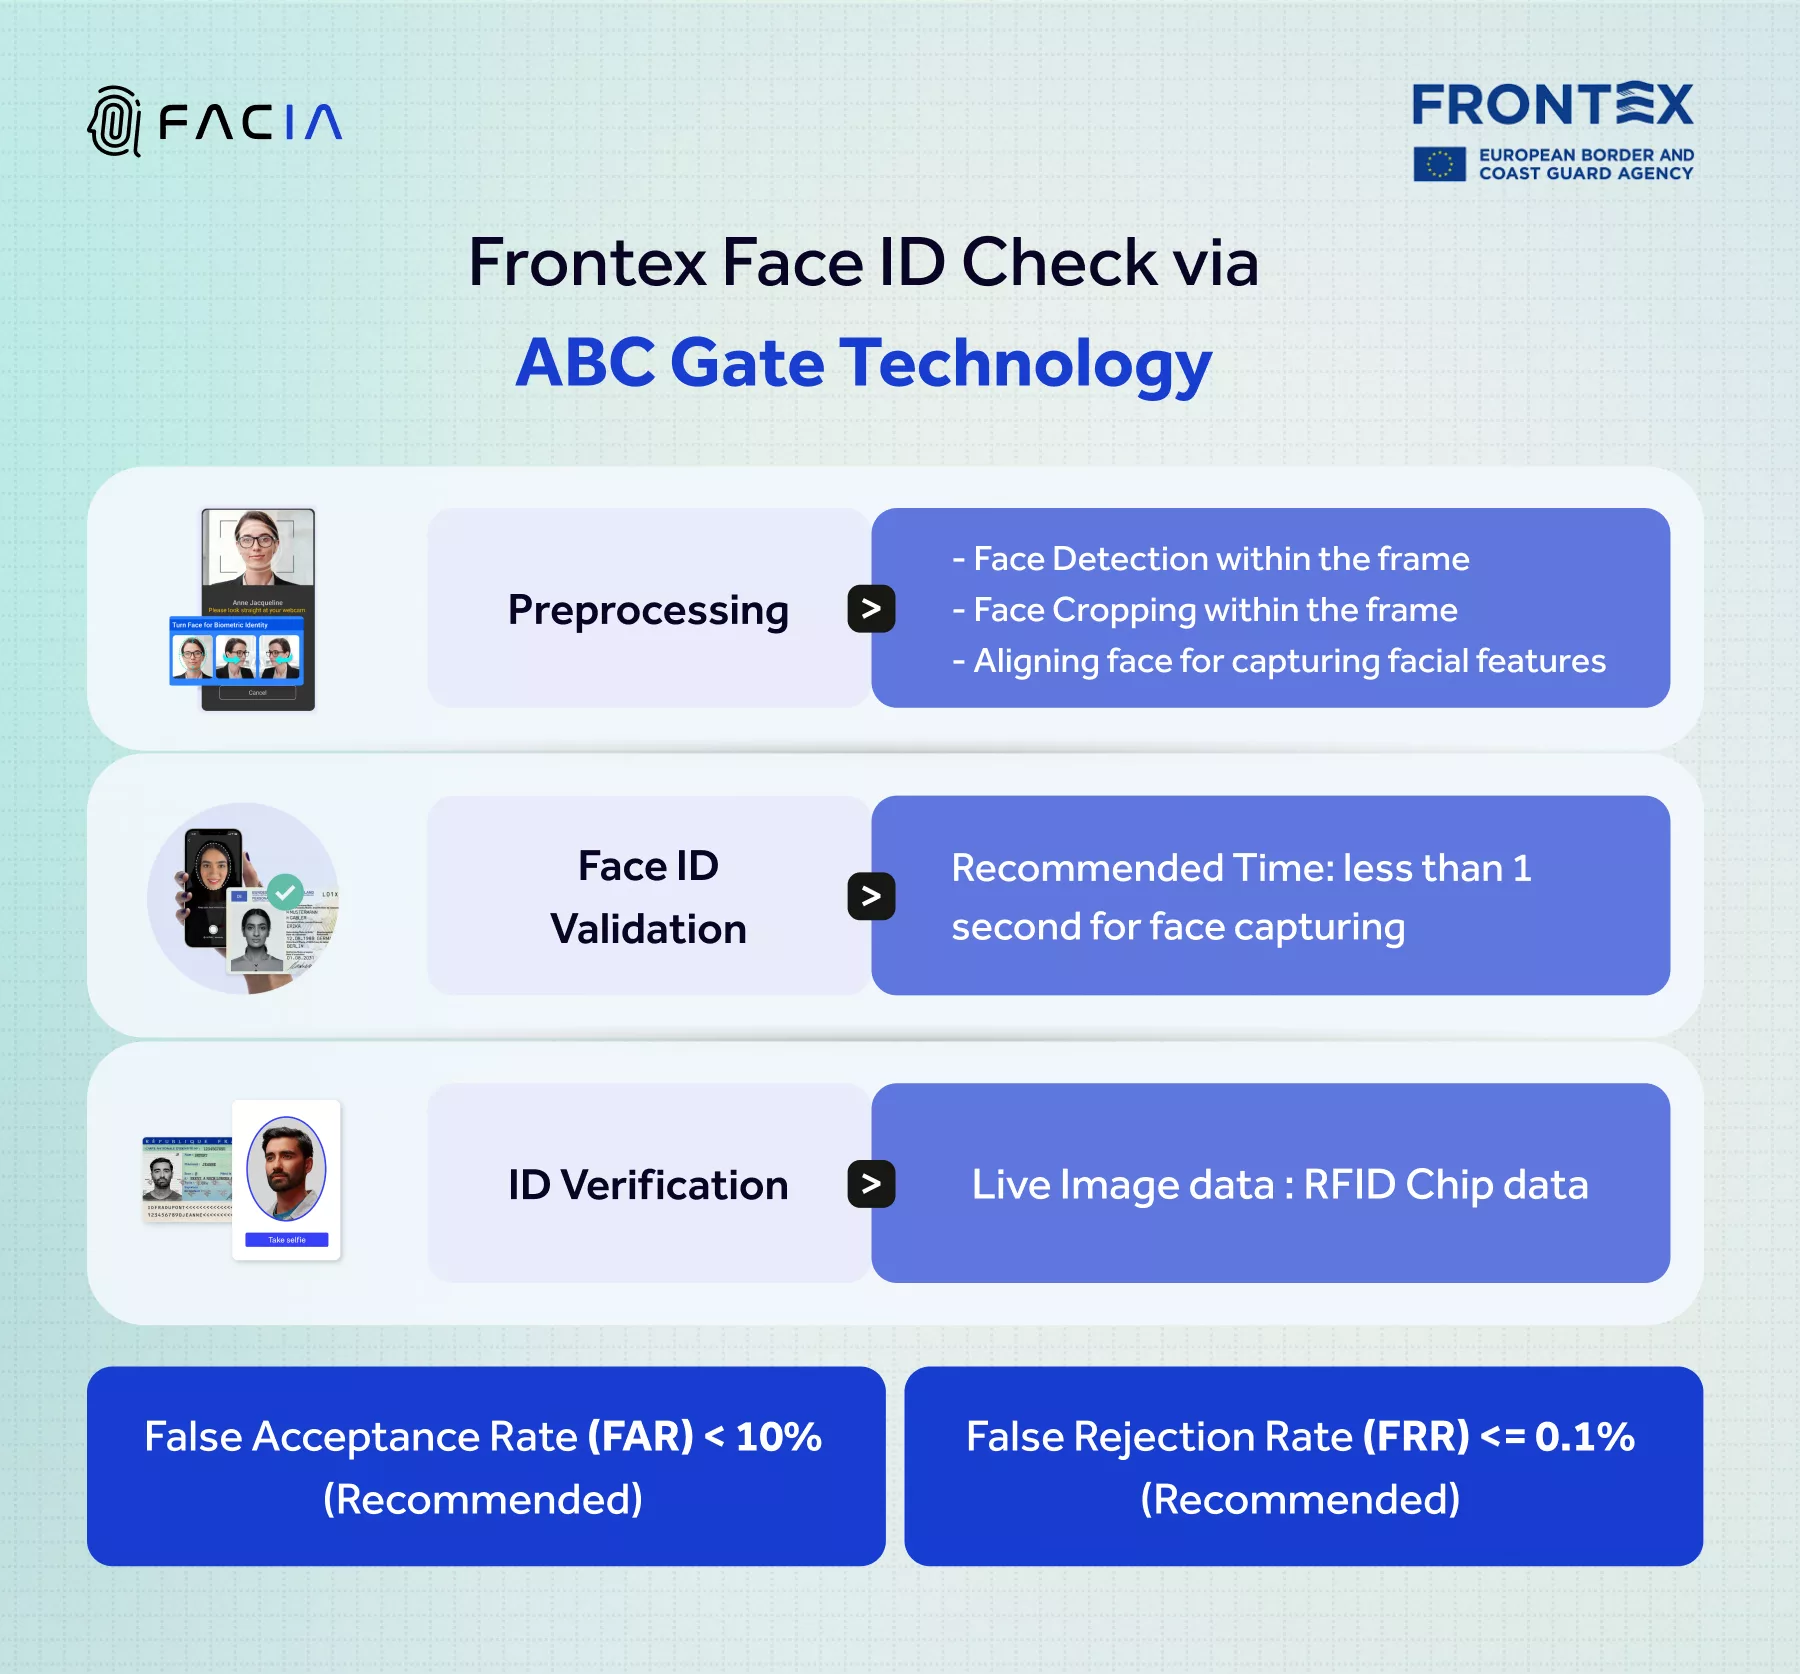 According to FRONTEX ABC gates should perform a face ID check as follows: